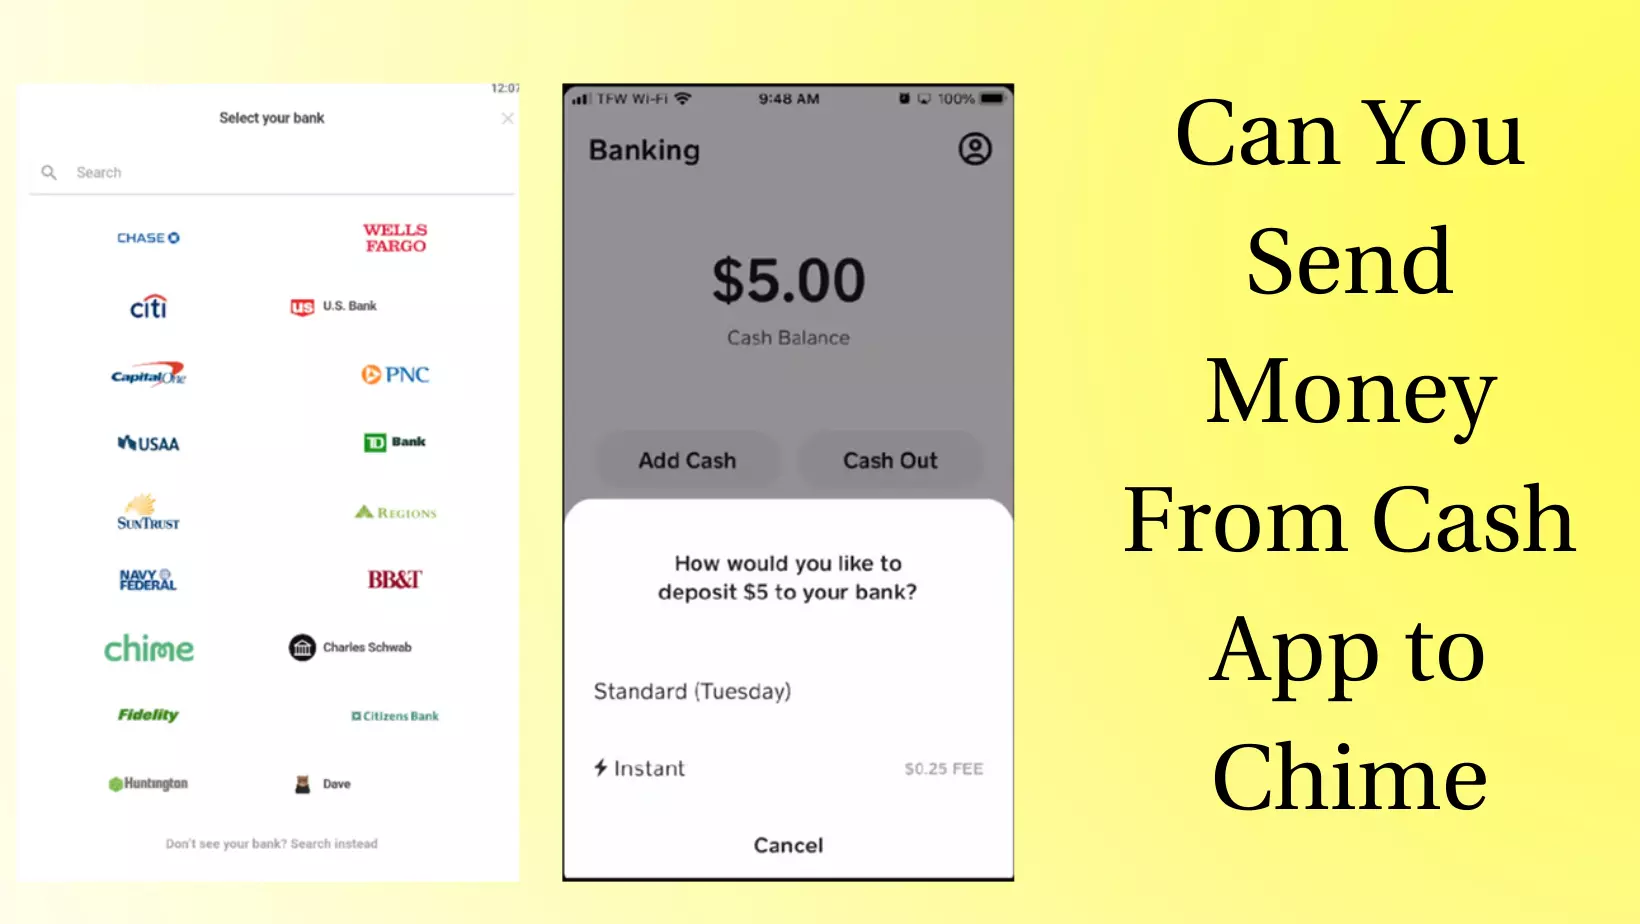 Can You Send Money From Cash App to Chime